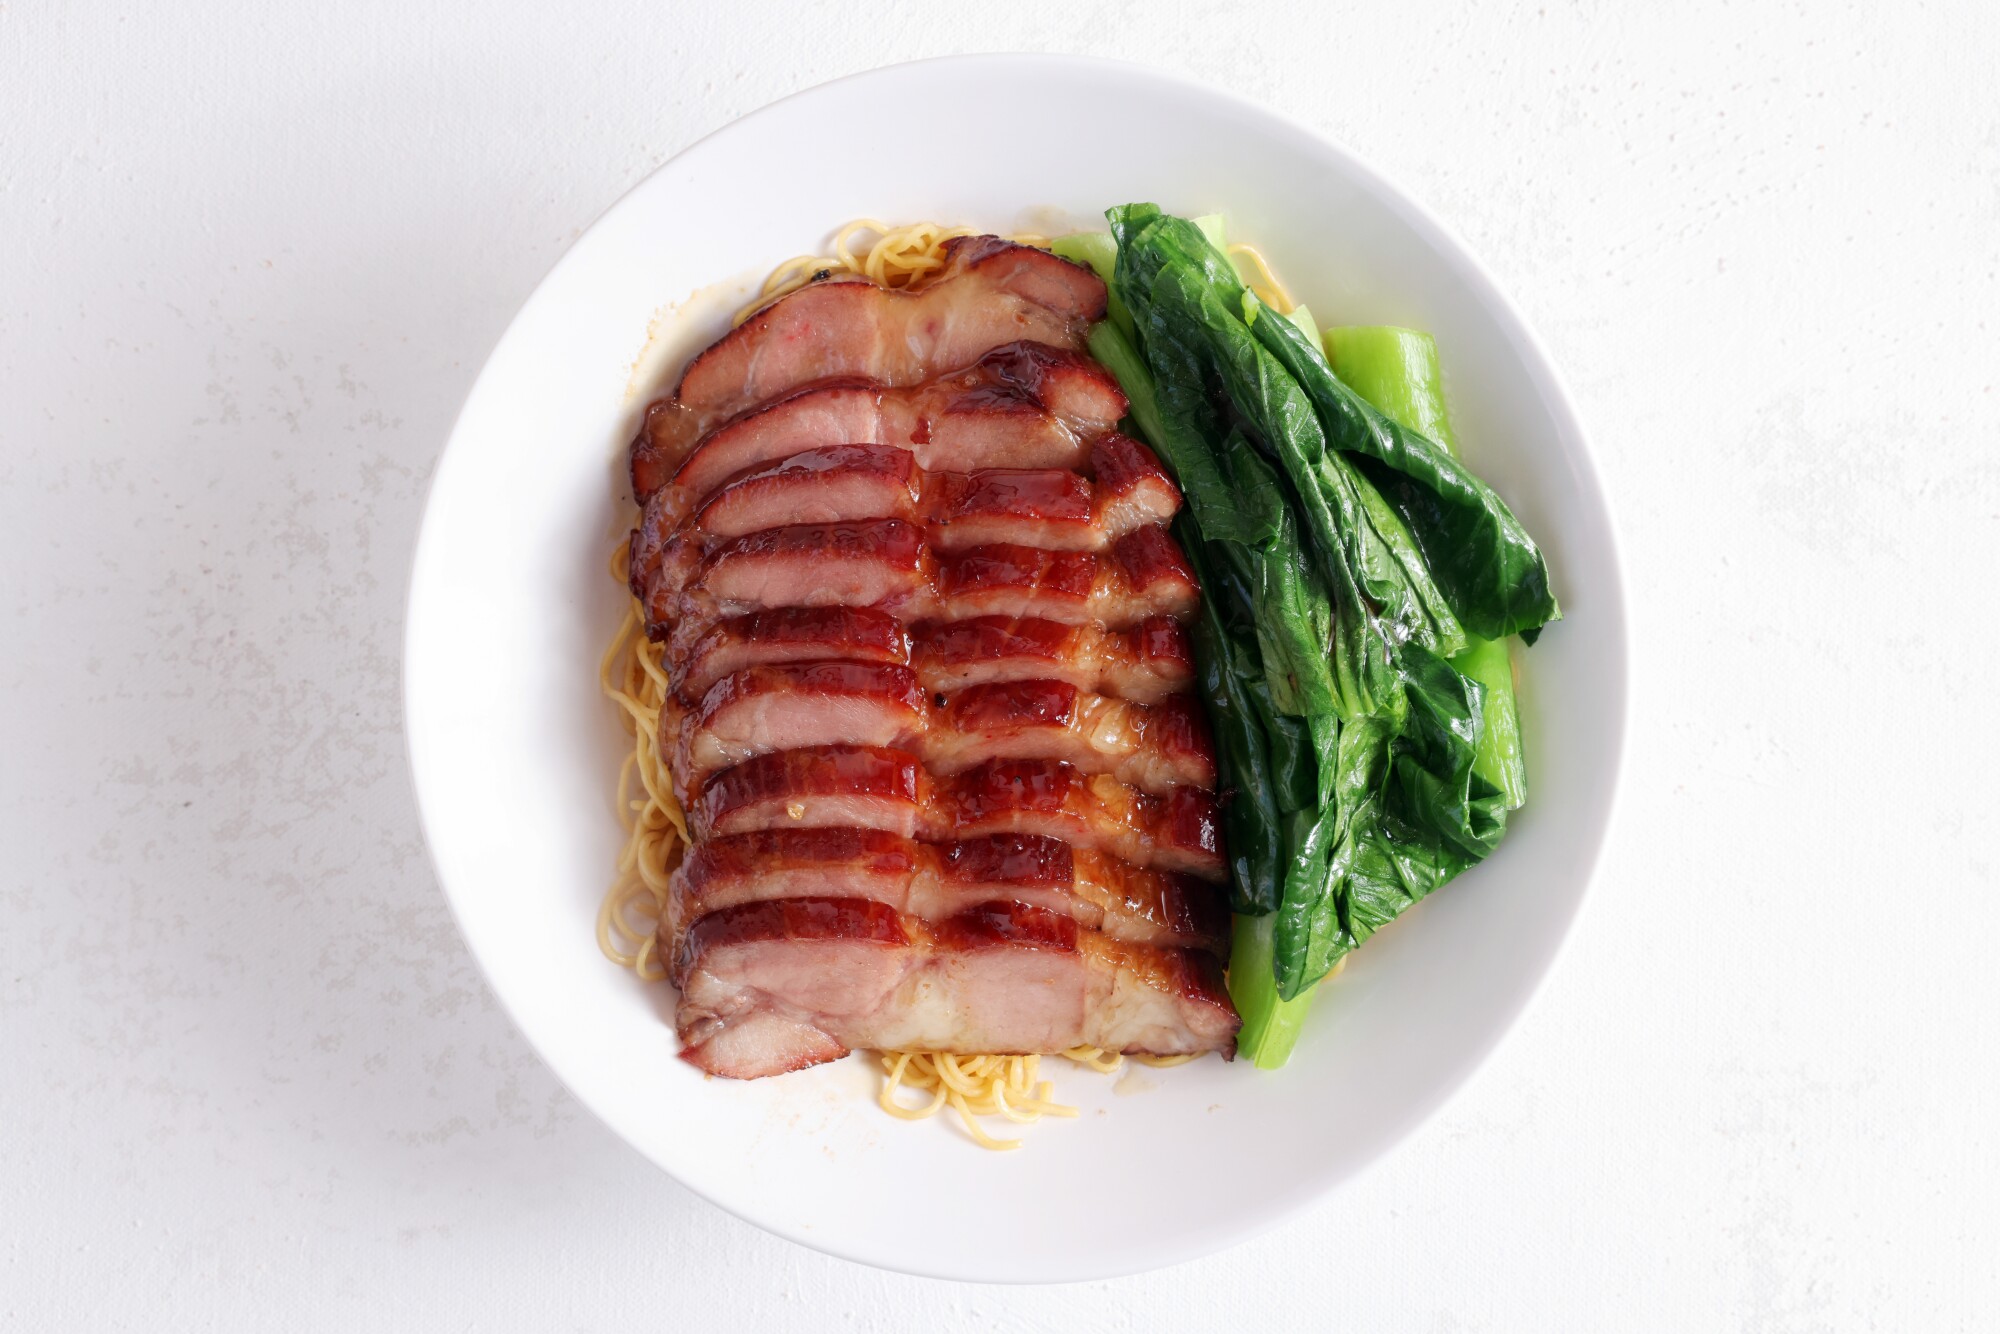 Pork and greens on a bed of noodles in a bowl with bok choy.